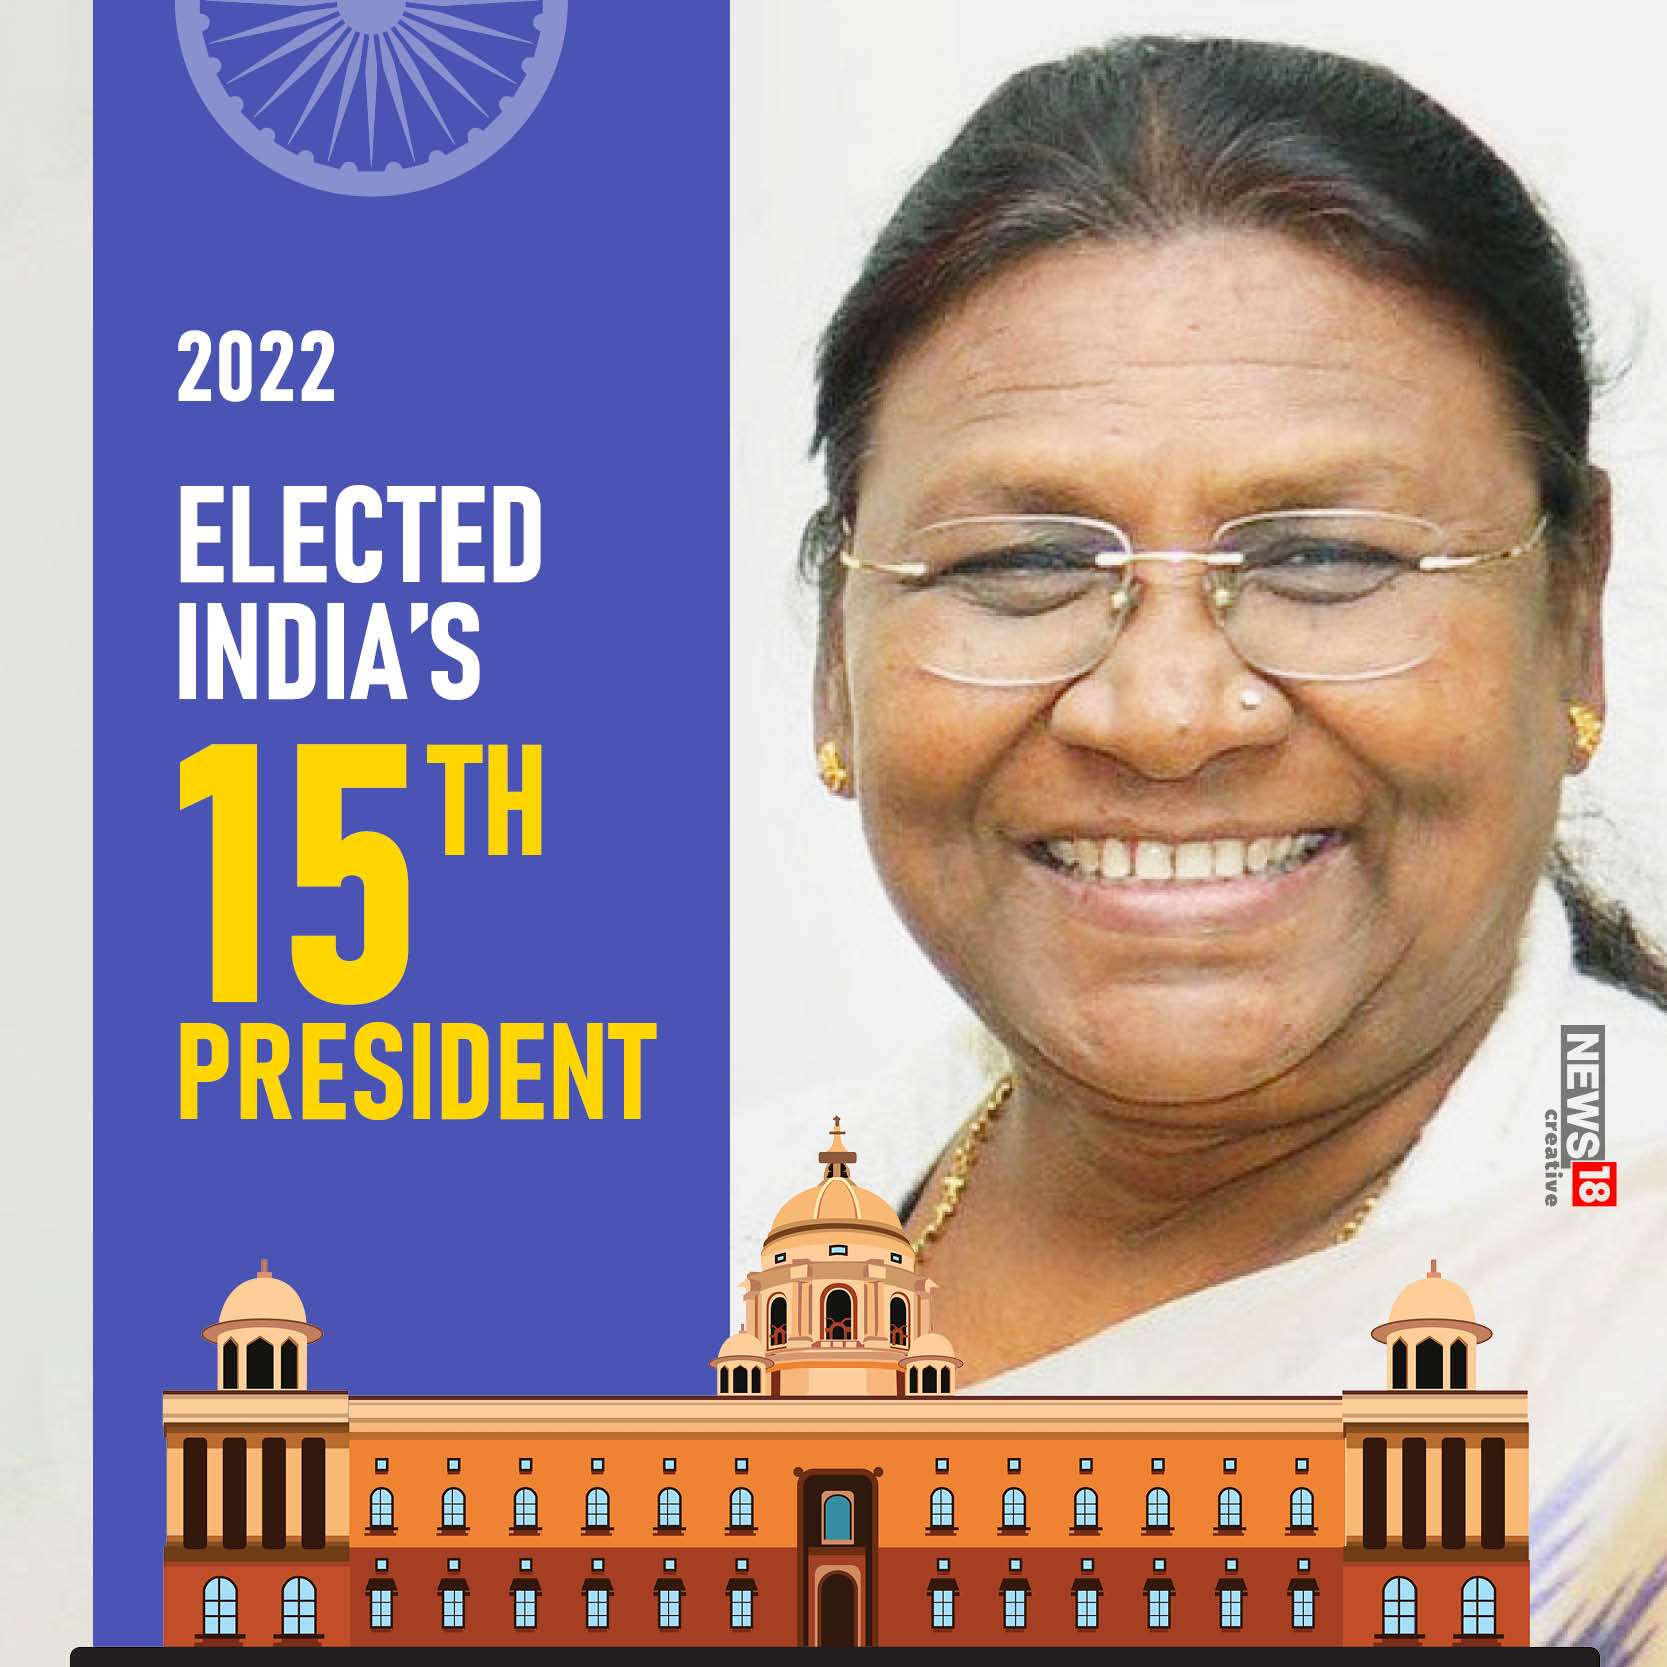 Droupadi Murmu: All you need to know about India's 15th President